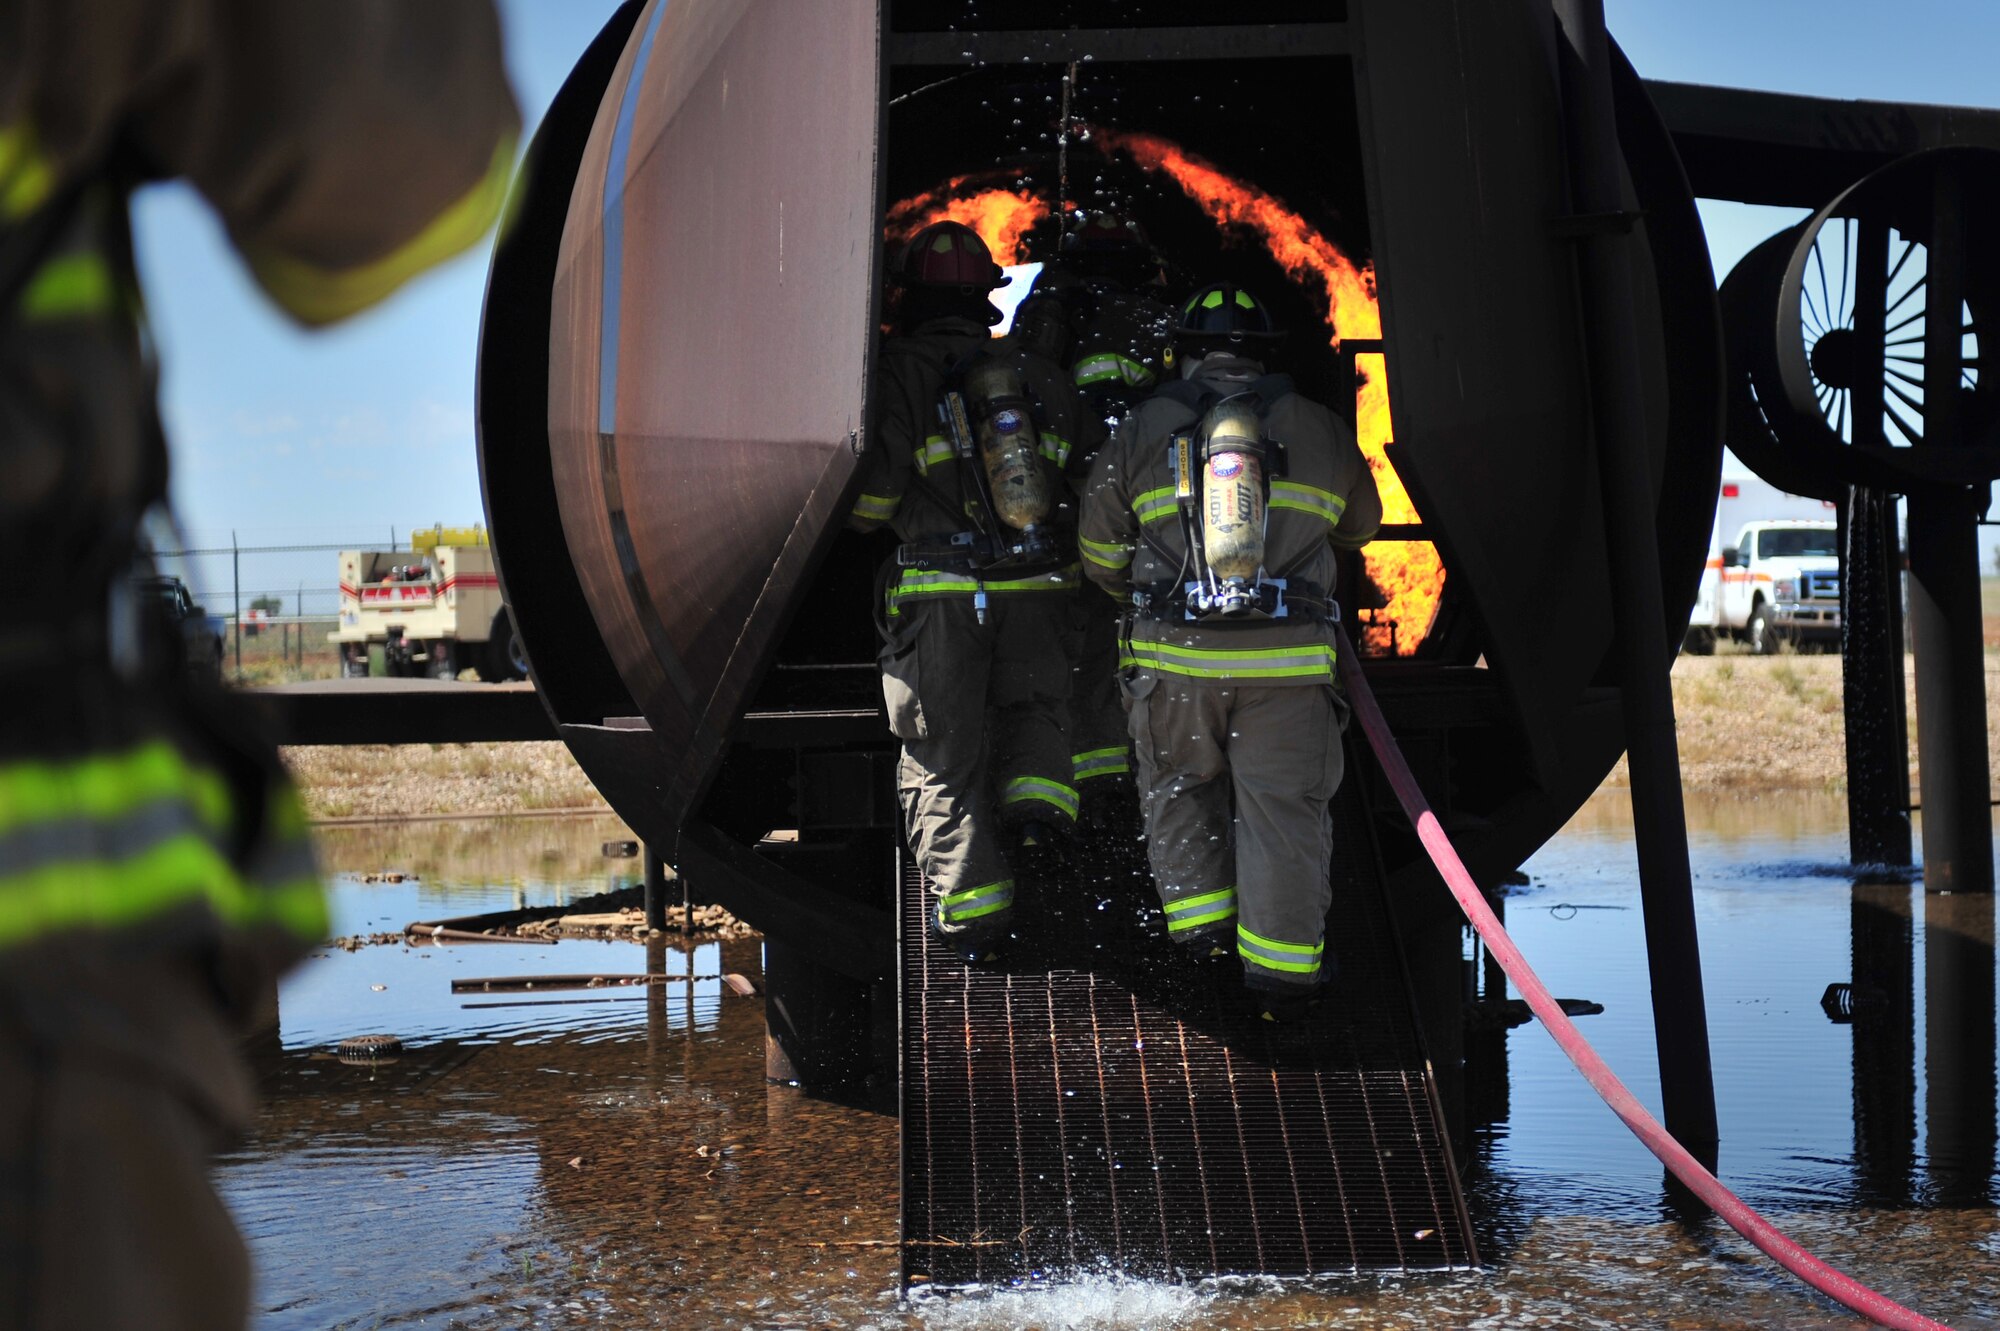 Firefighters with the Clovis, N.M. Fire Department enter the burn pit aircraft to extinguish a fire at Cannon Air Force Base, N.M., Aug. 2, 2012. The pit houses a replicated aircraft equipped with a propane tank and several igniters used to sustain training fires. (U.S. Air Force photo/Airman 1st Class Alexxis Pons Abascal) 